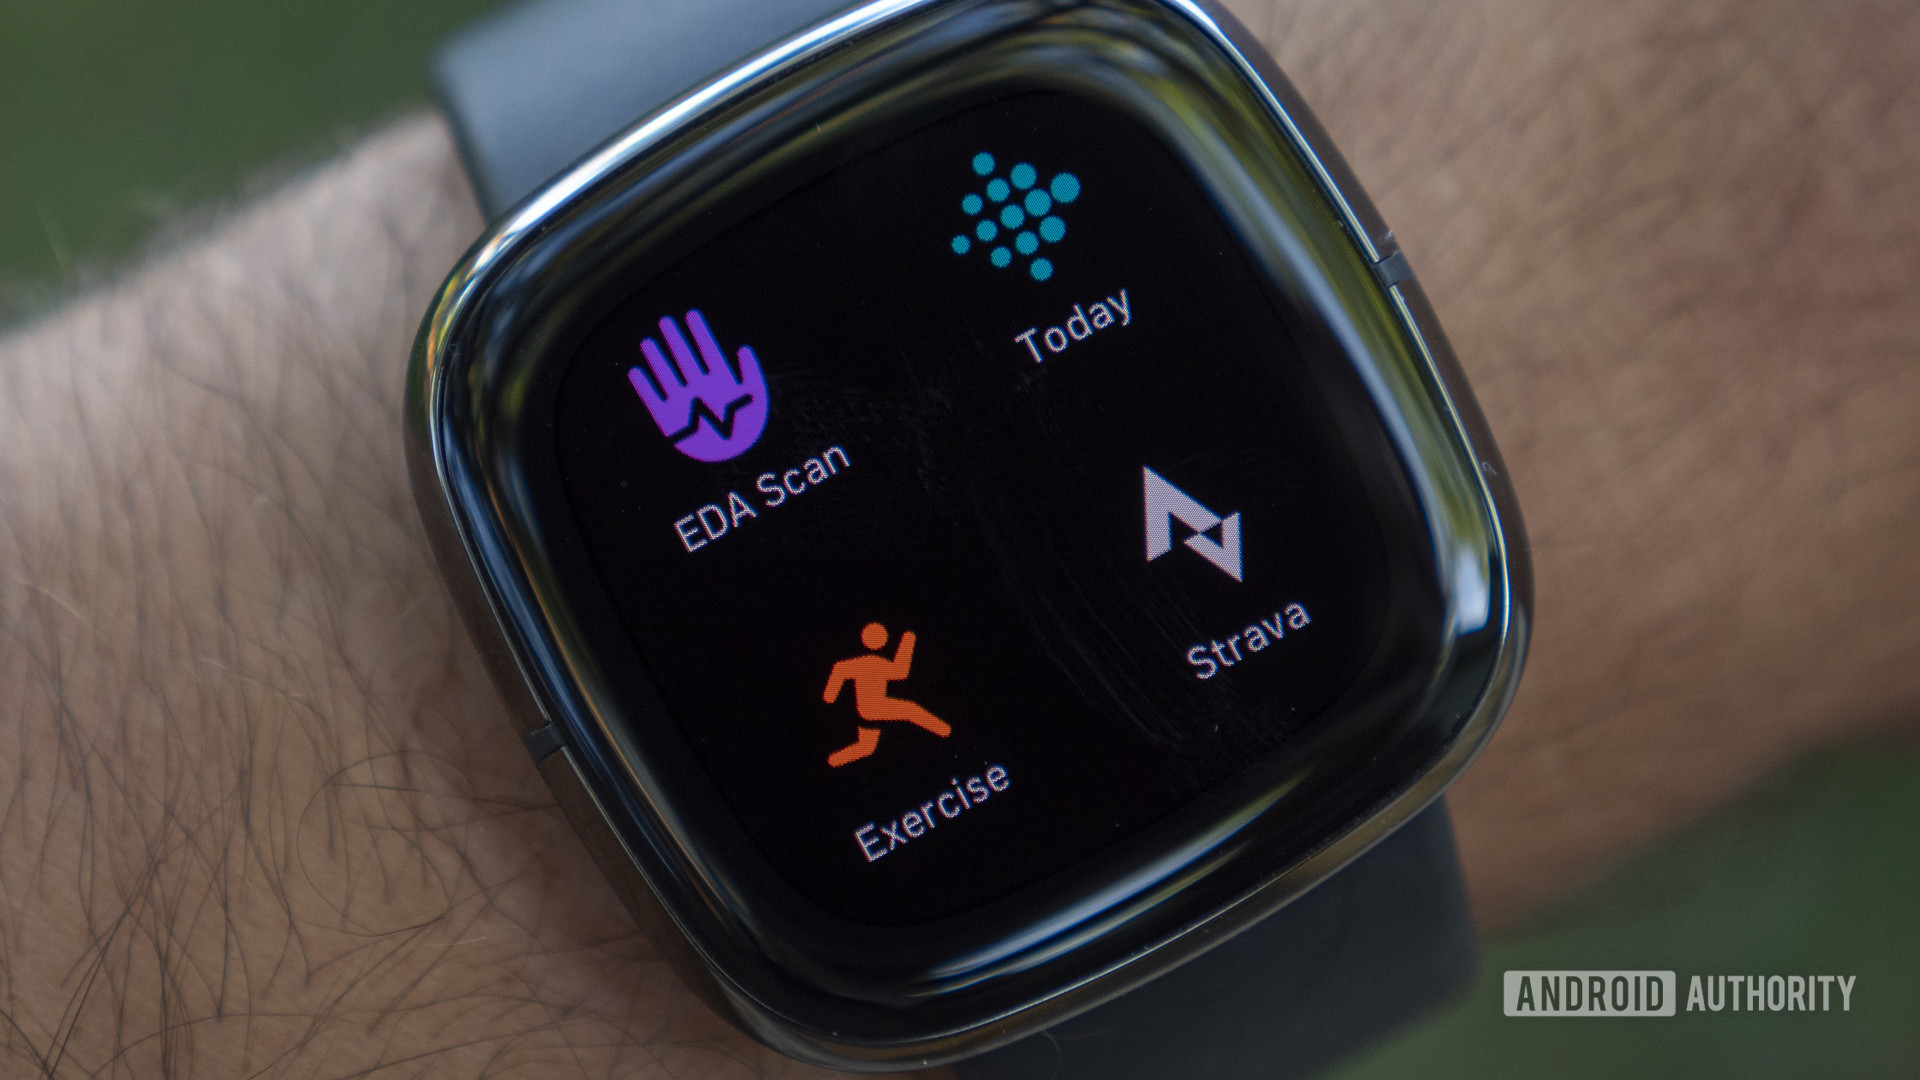 Fitbit Sense review watch face showing apps for exercise, Strava, and EDA scan